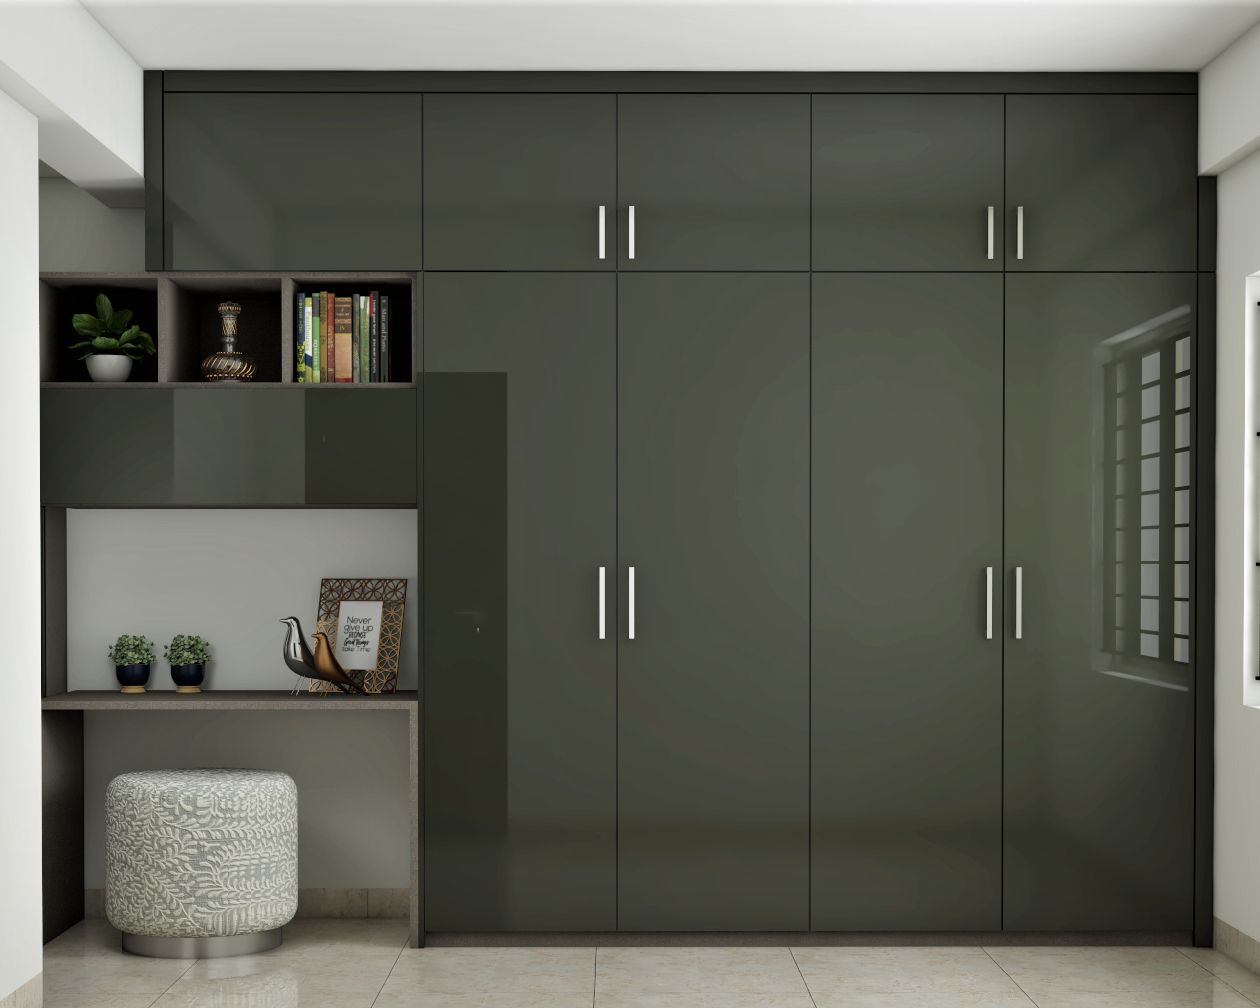 Single Toned Hinged Modern Wardrobe Design with Loft and Study